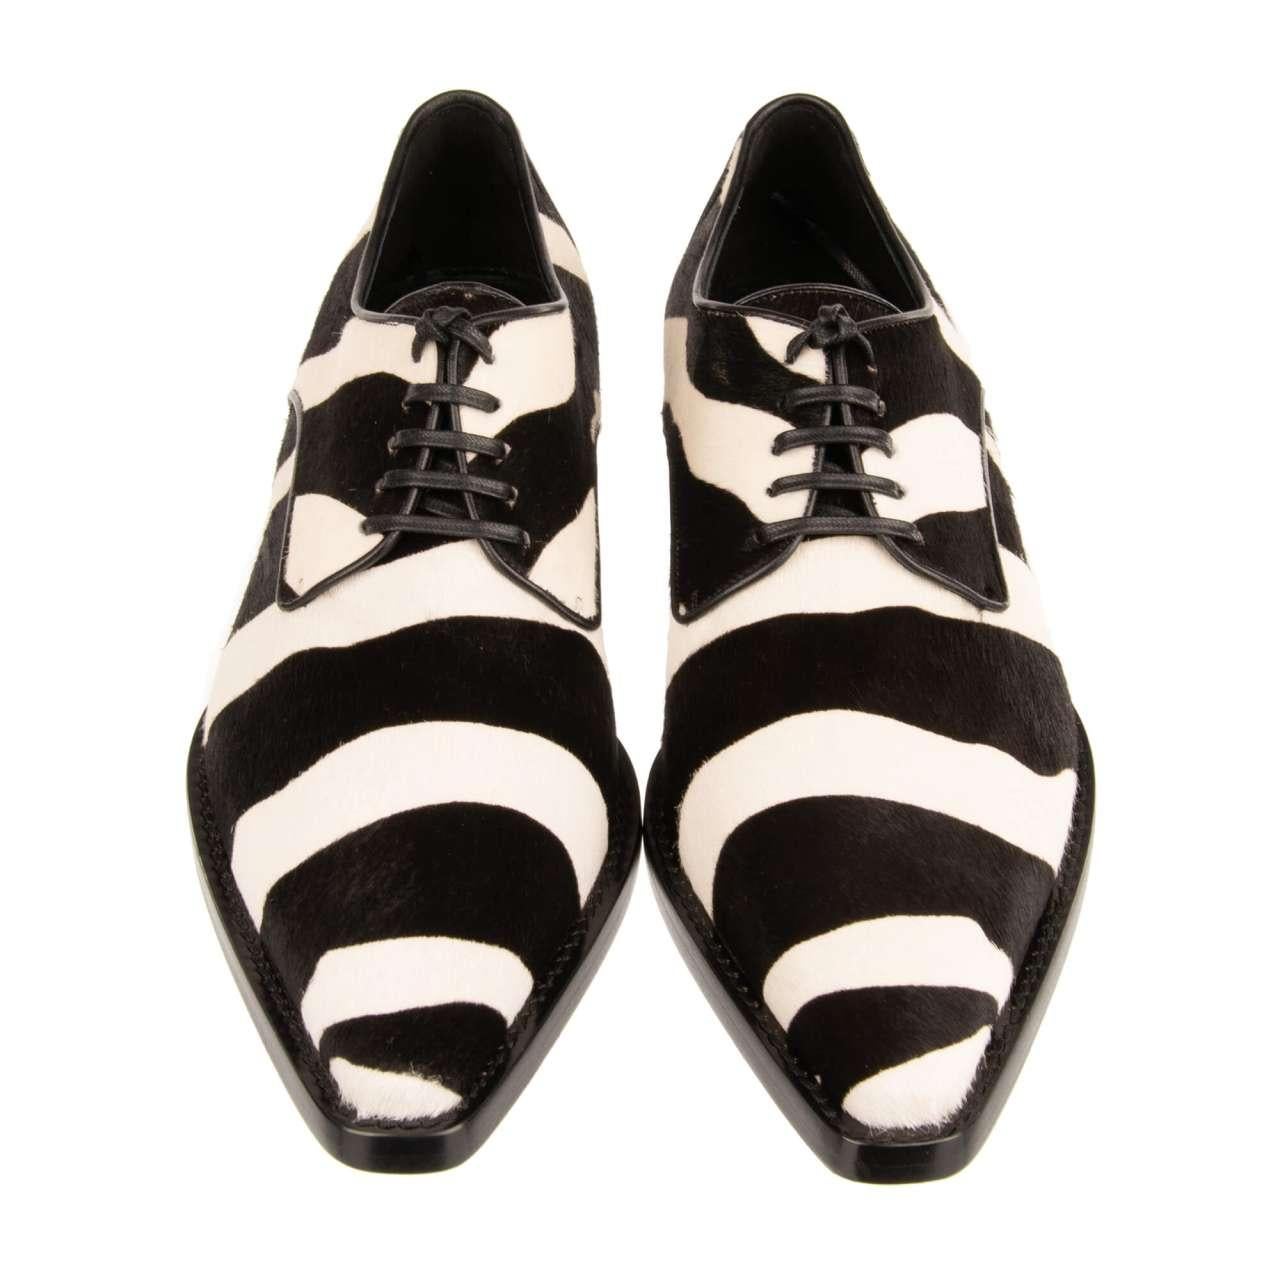 - Classic pony fur leather shoes ZANZARA with pointy toe shape and zebra print in black and white by DOLCE & GABBANA - MADE IN ITALY - New with Box - Model: CN0052-AC861 - Material: 80% Calf fur, 20% Lamb leather - Sole: Leather - Color: Black /